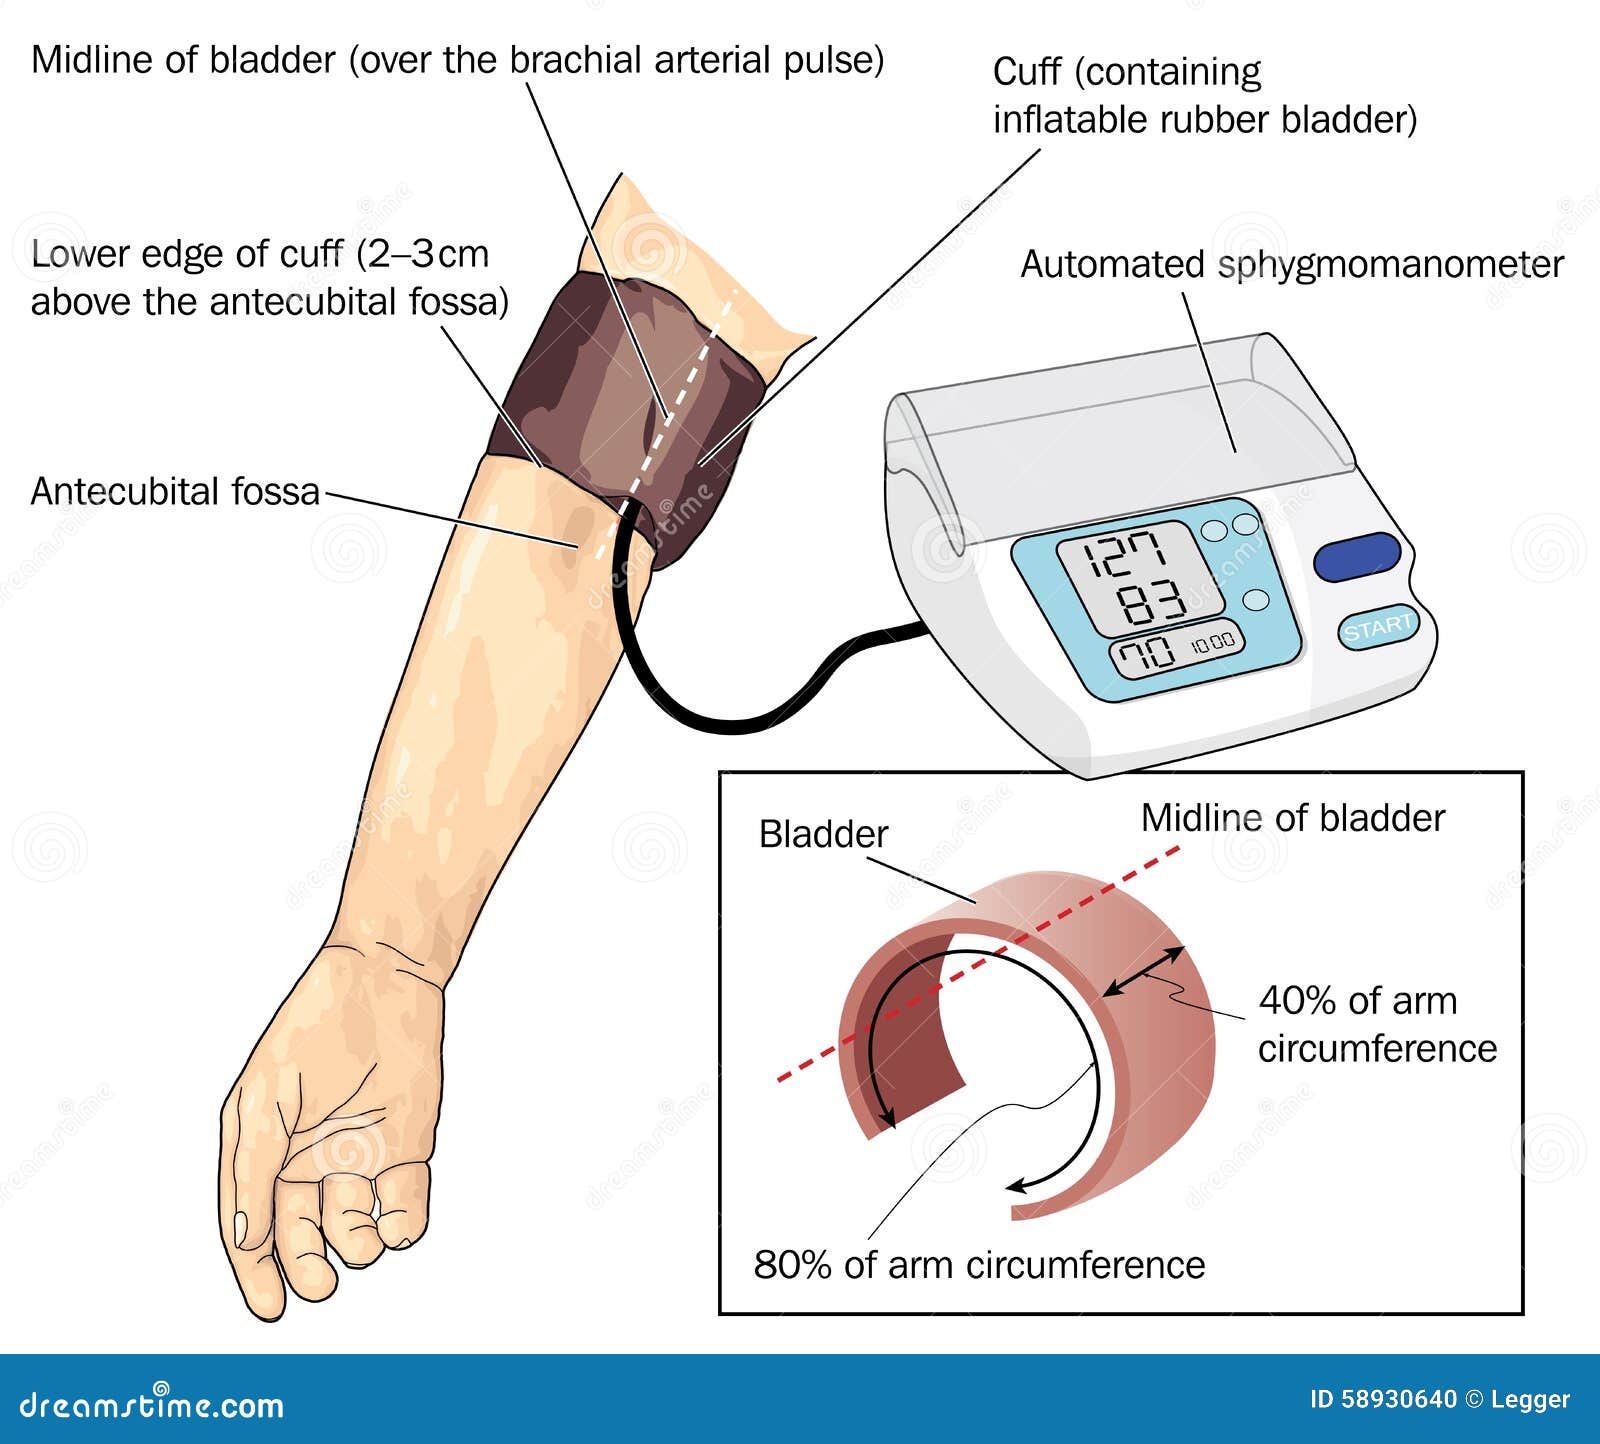 Blood pressure measurement | Department of Measurement and Information Systems